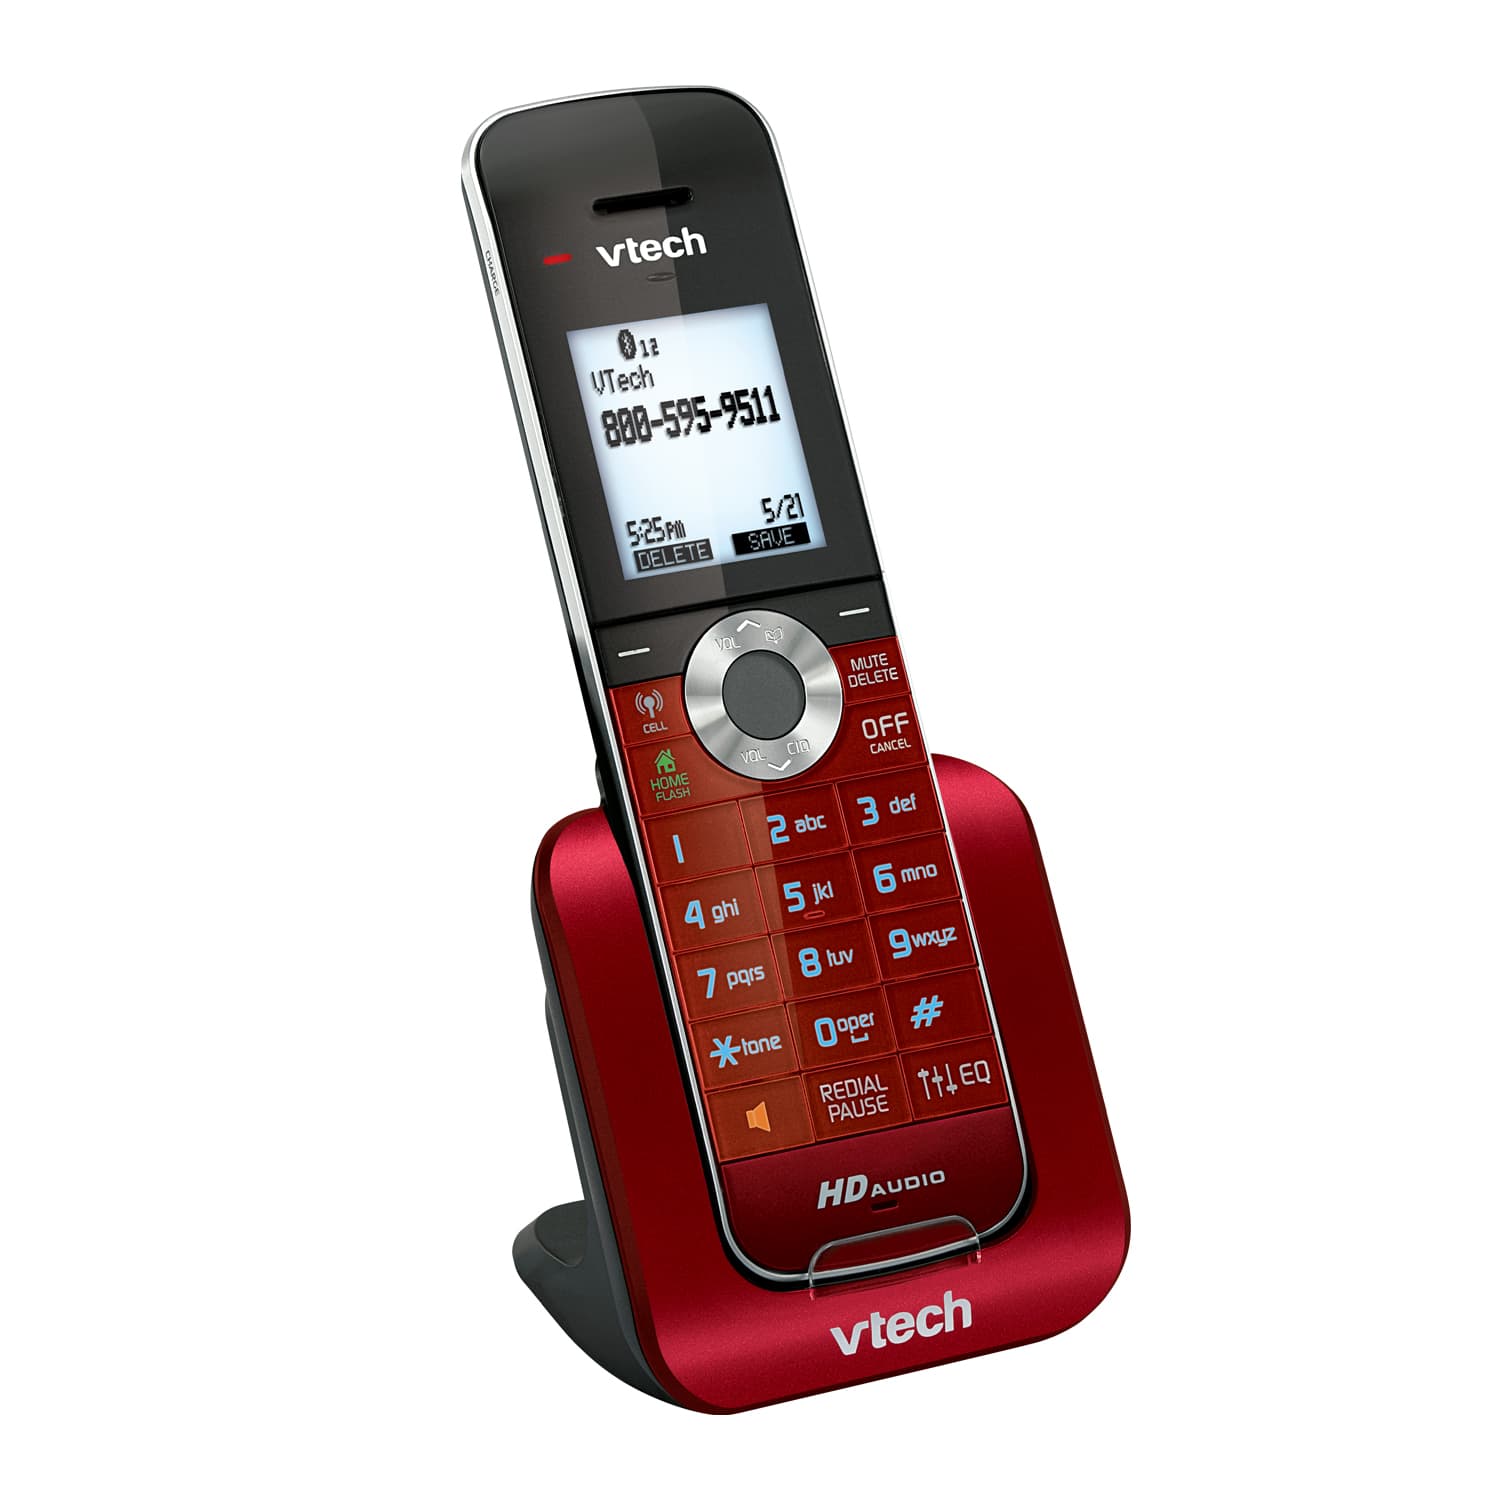 1 Cordless Accessory Handset Silver VTech CS6709 DECT 6.0 Phone with Caller ID/Call Waiting Renewed 